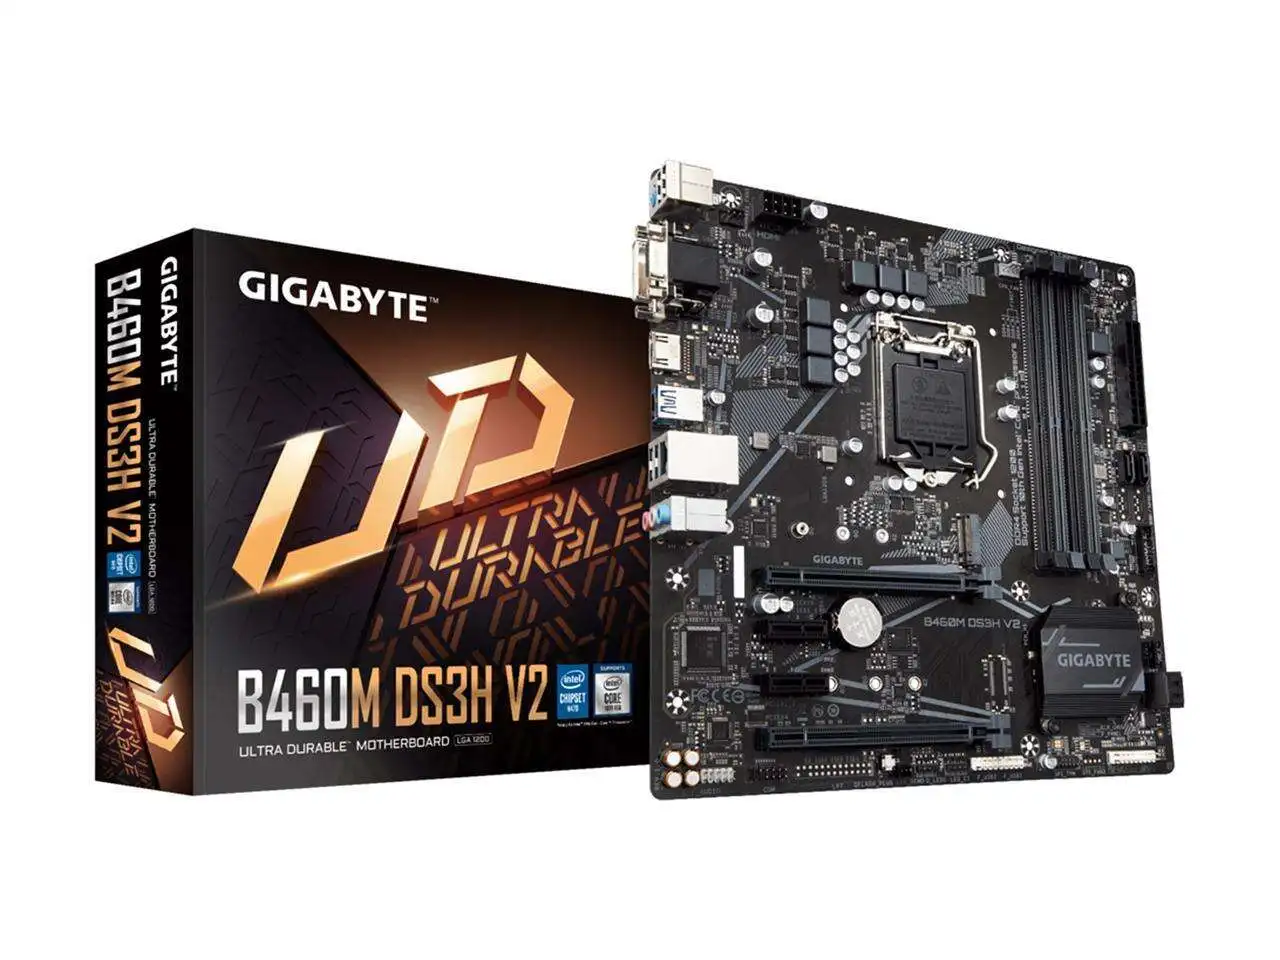 

GIGABYTE New GA B450M DS3H V2 (rev. 1.x) Micro-ATX AMD B450 DDR4 2933MHz M.2 USB 3.1 128G Double Channel Socket AM4 Motherboard